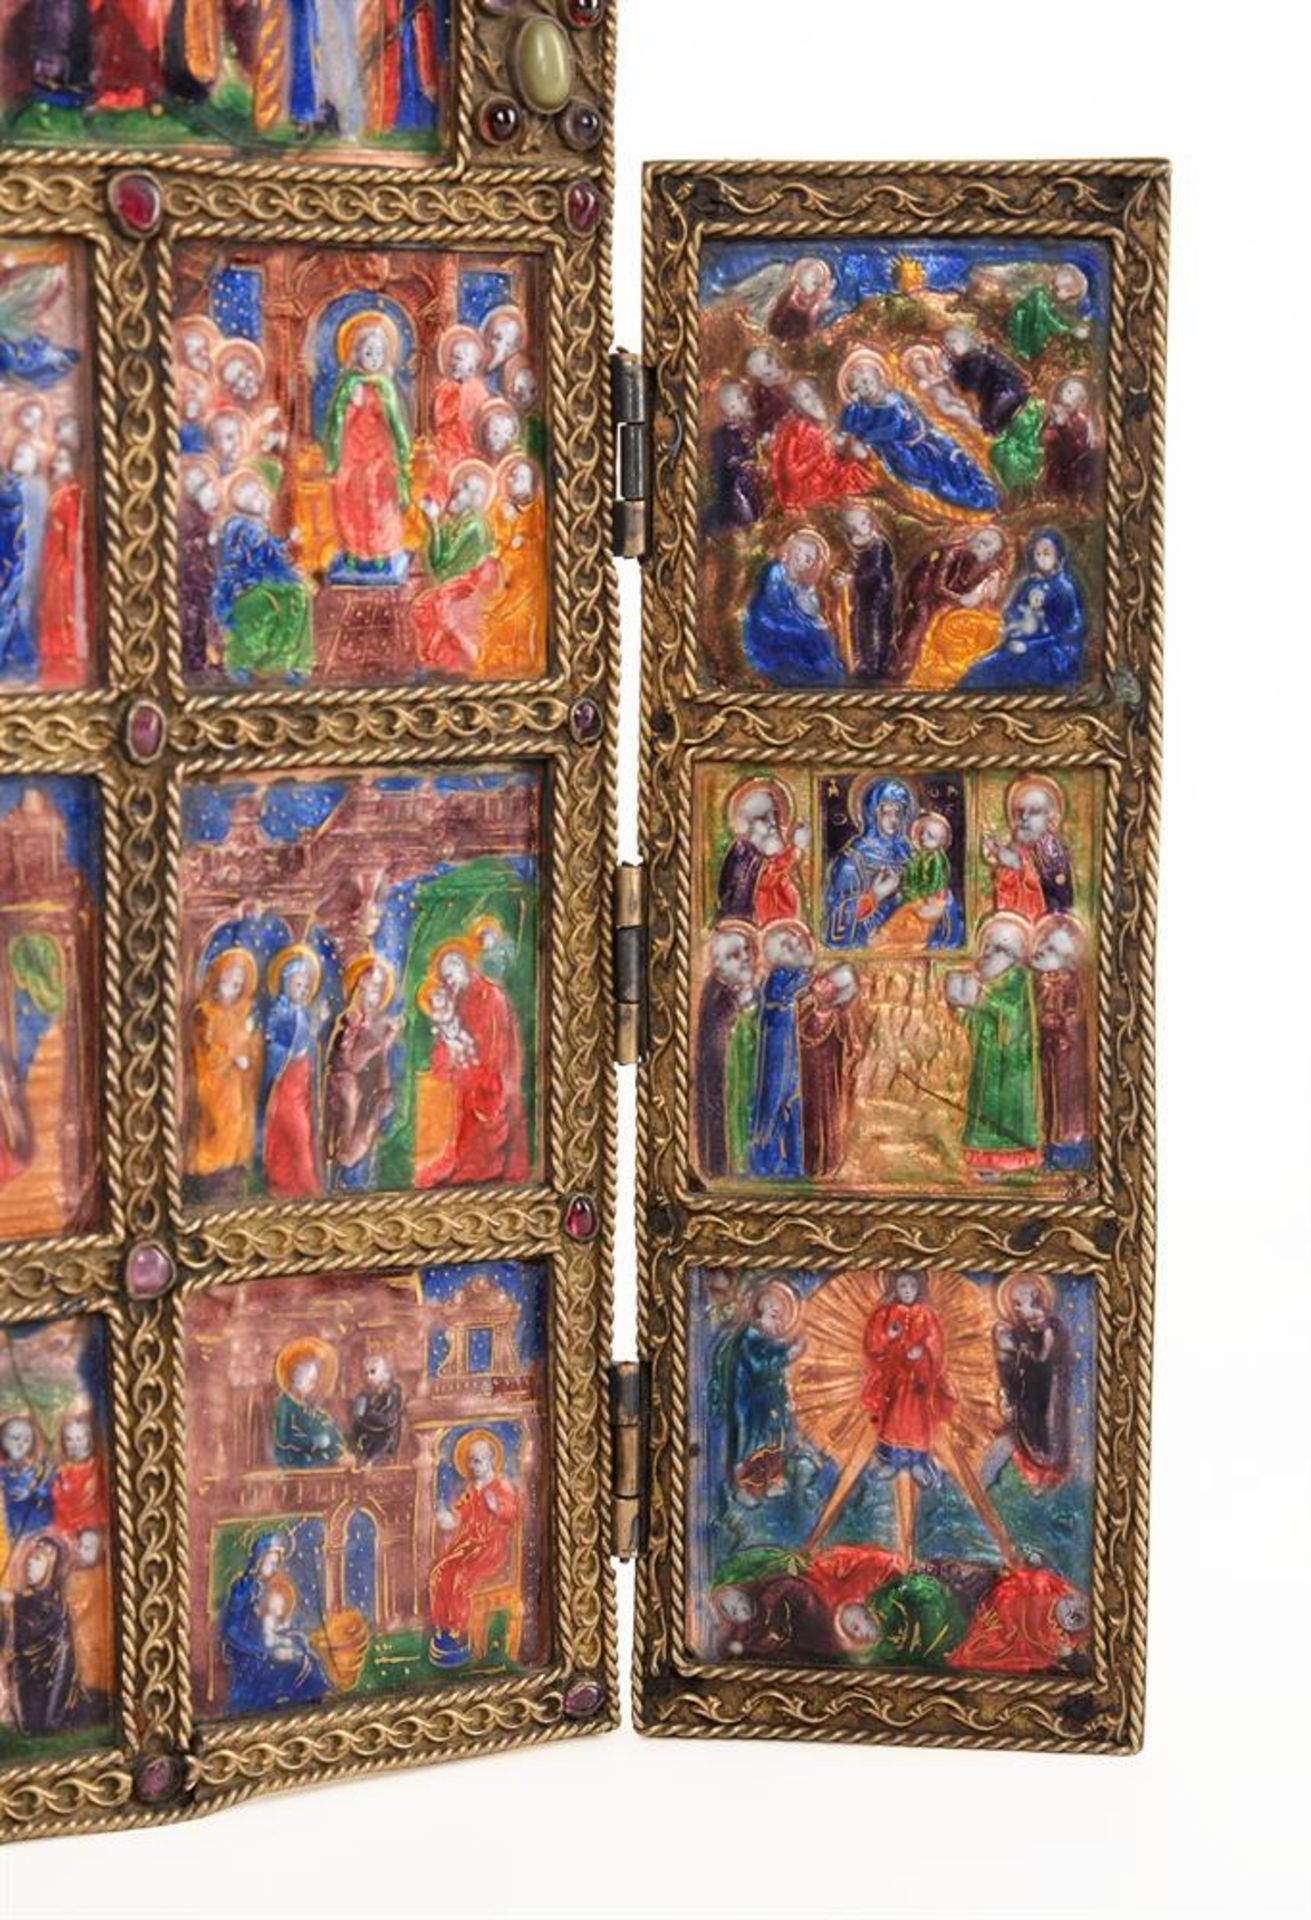 AN ENAMEL SET FOLDING DEVOTIONAL TRIPTYCH IN THE EARLY 16TH CENTURY LIMOGES MANNER - Image 4 of 6